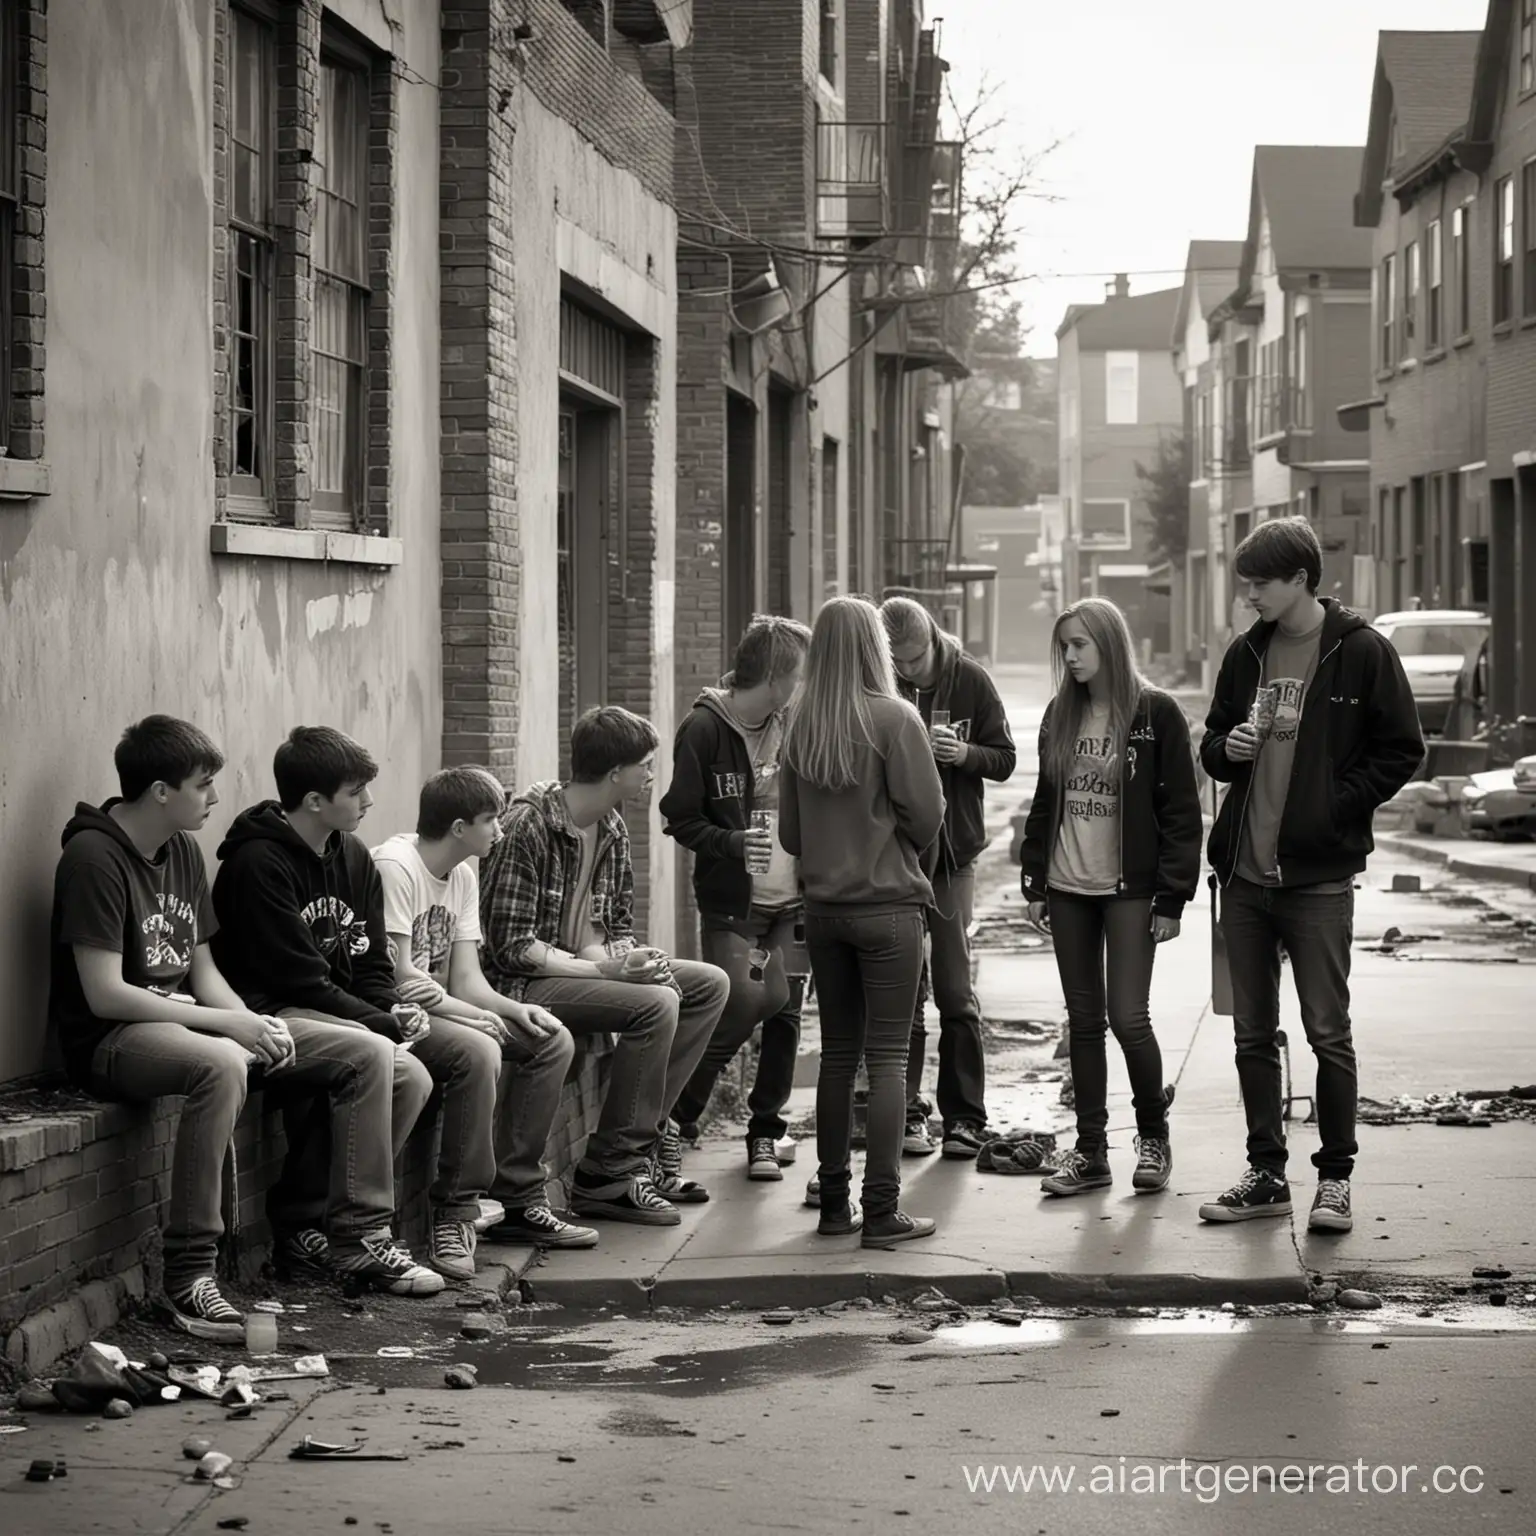 Teenagers-in-an-Unfavorable-Area-Depicting-Sadness-and-Oppression